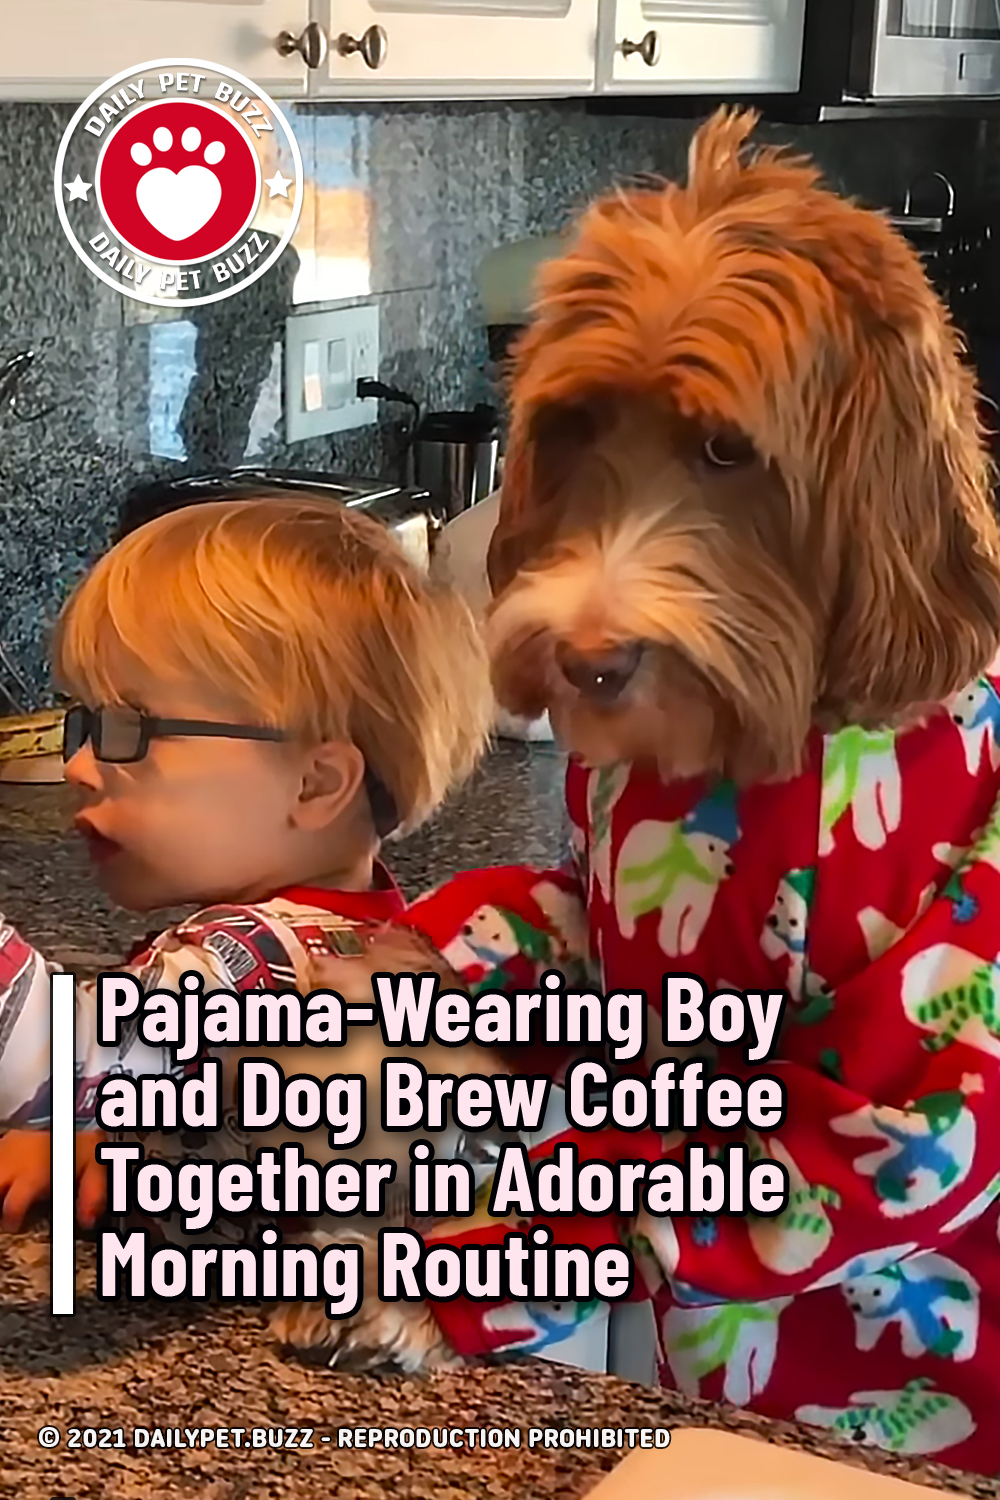 Pajama-Wearing Boy and Dog Brew Coffee Together in Adorable Morning Routine